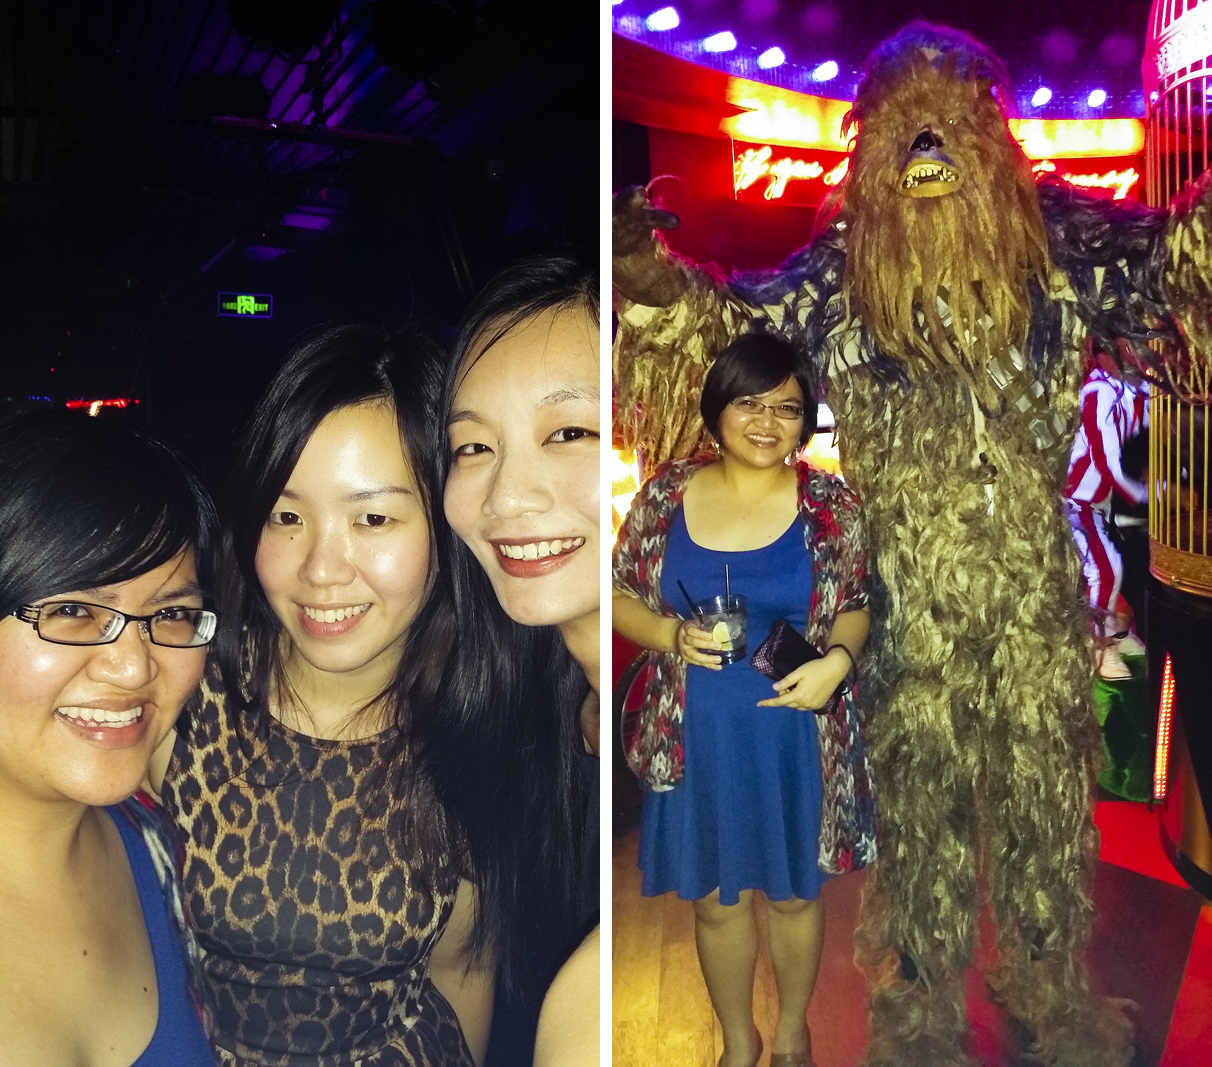 Selfie and Puey with Chewbacca costume at Cirque le Soir nightclub in Shanghai.